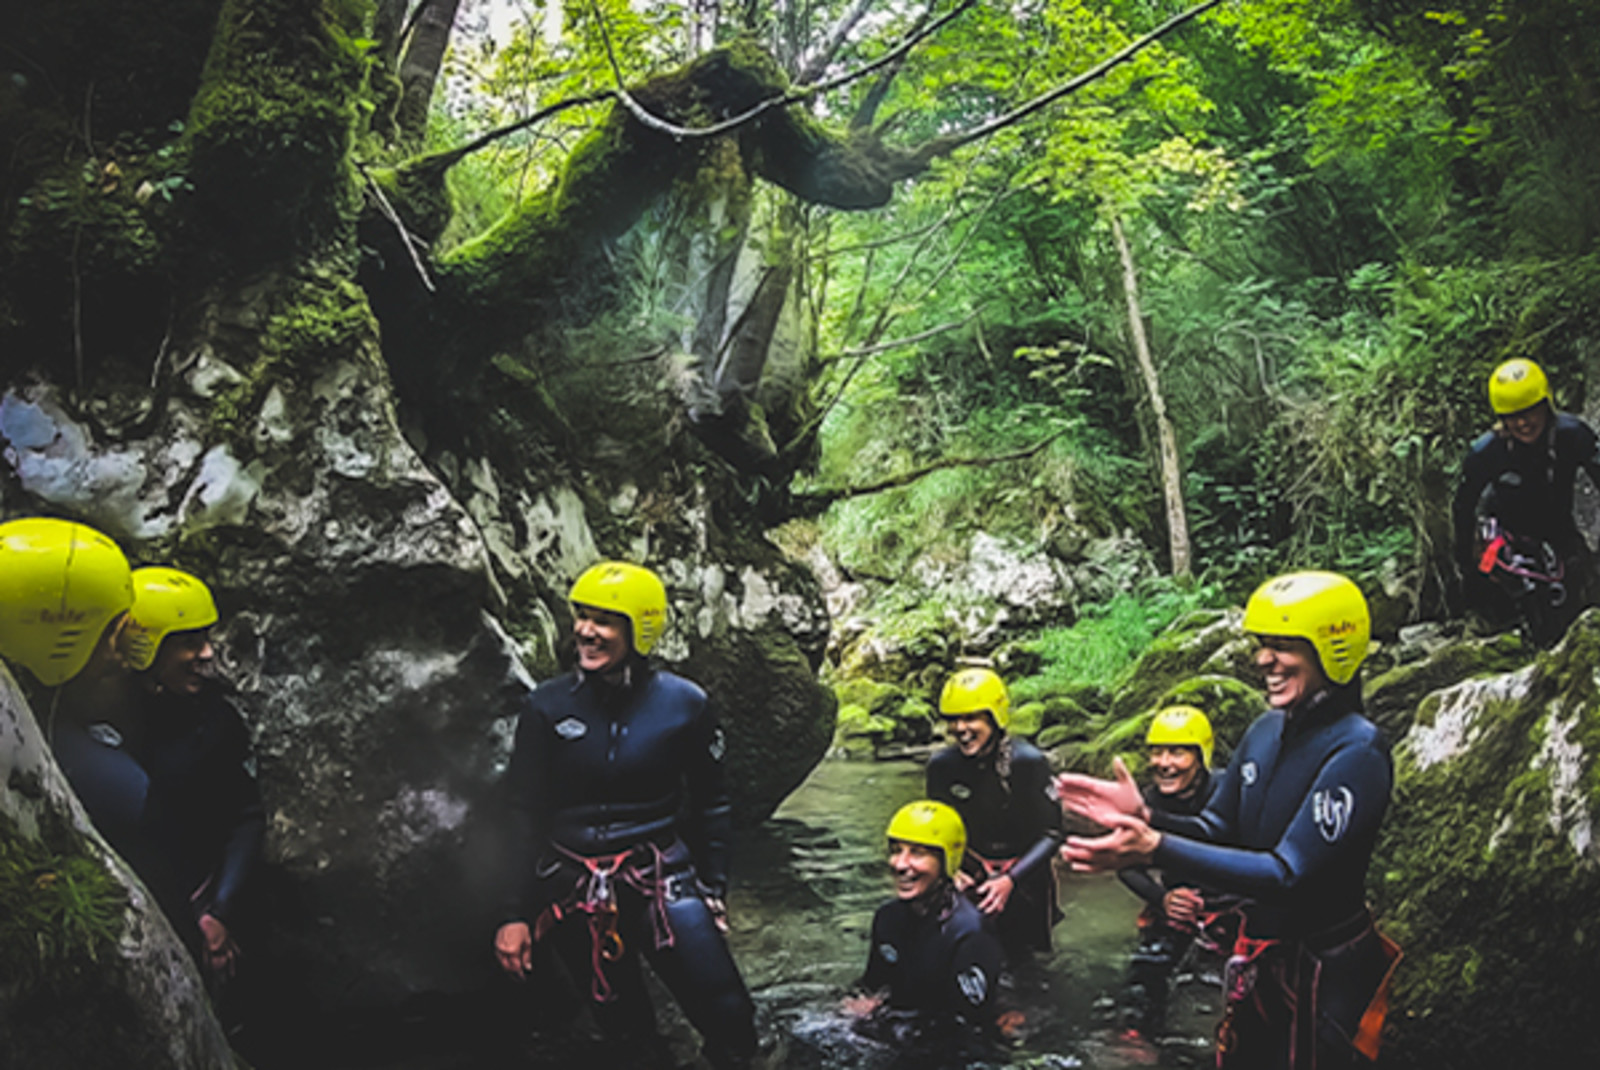 The Perfect 7 Days in Asturias, Spain  - Day 5: Caving and Cabrales cheese